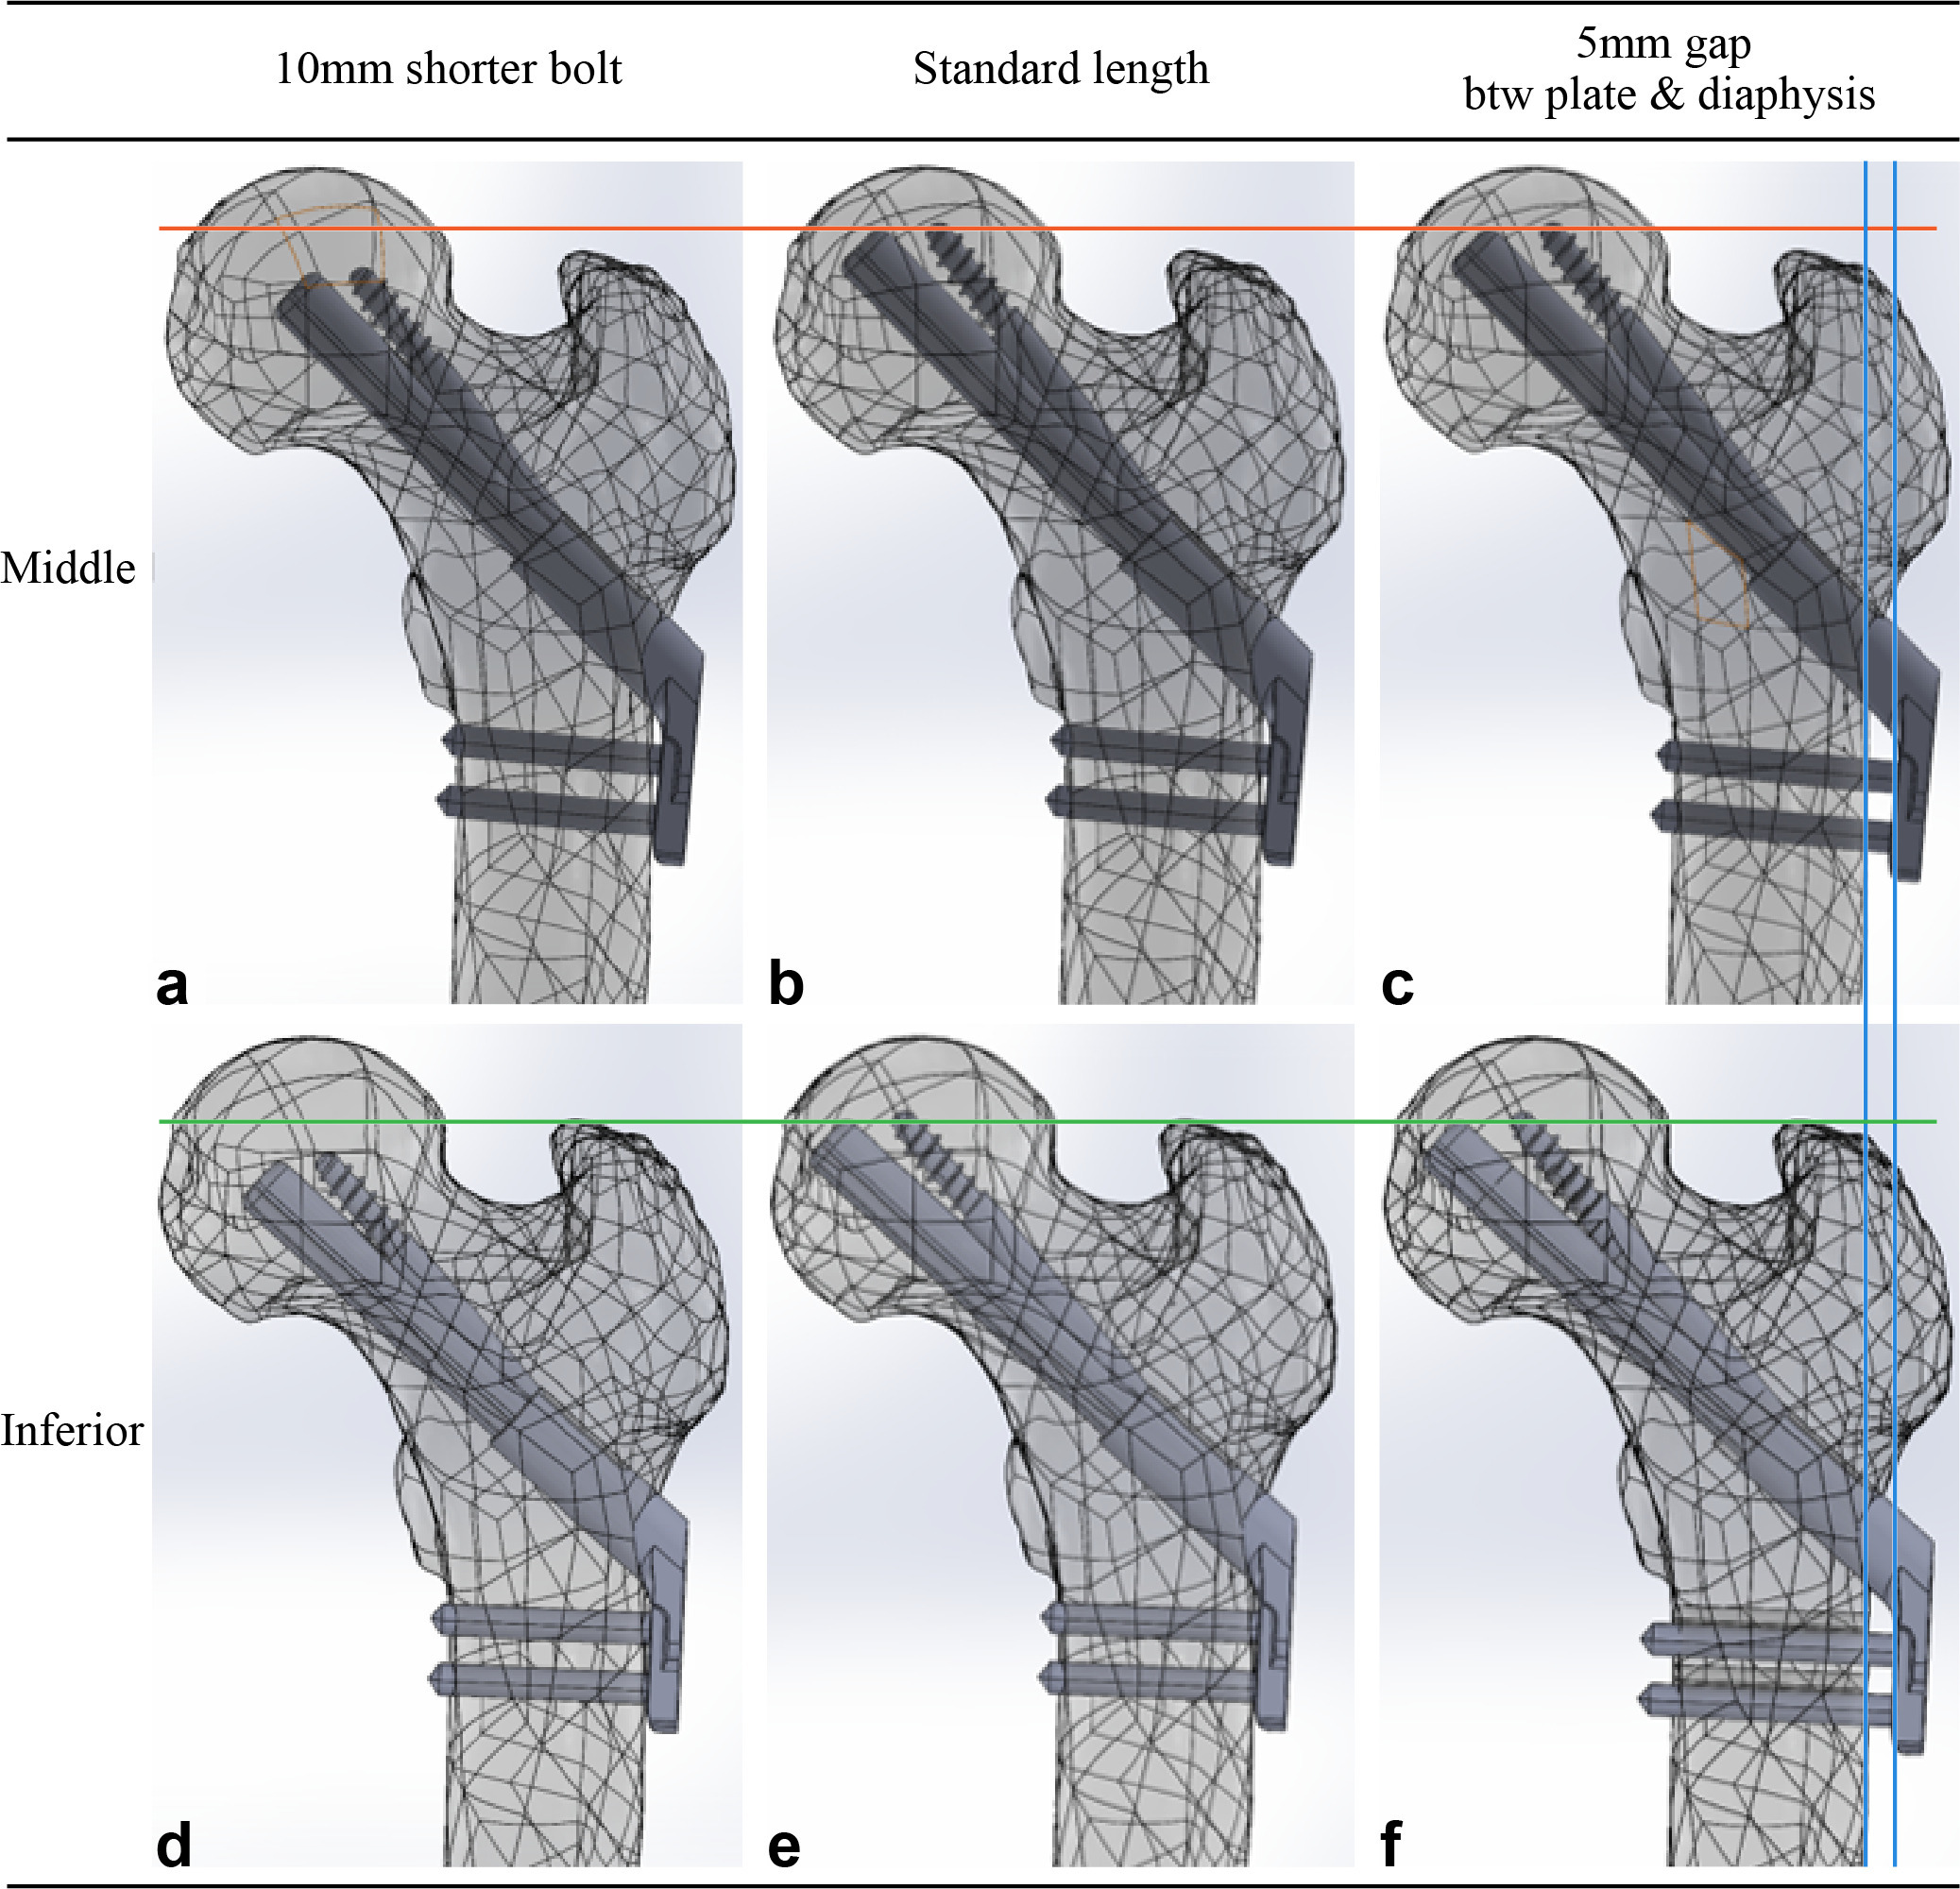 Fig. 1 
            Femur models with Pauwels III femur neck fracture were virtually fixed with the Femoral Neck System and were established with different combinations of surgical variations. a) to c) The bolt was placed in the central trajectory with respect to the neck cortical corridor in three models in the upper row, while d) to f) the bolt was placed in the inferior trajectory in three models in the lower row. The bolt measured 100 mm in length in the two models in the central column (b, e), which provides the shortest gap between the subchondral bone and implant tip without violating the articular surface. The length of bolts in the two models in the left column (a, d) was 10 mm shorter than the standard bolt. There was a gap between the plate and diaphysis and a 5 mm longer bolt to restore the position of the bolt tip in the two models in the right column (c, f).
          